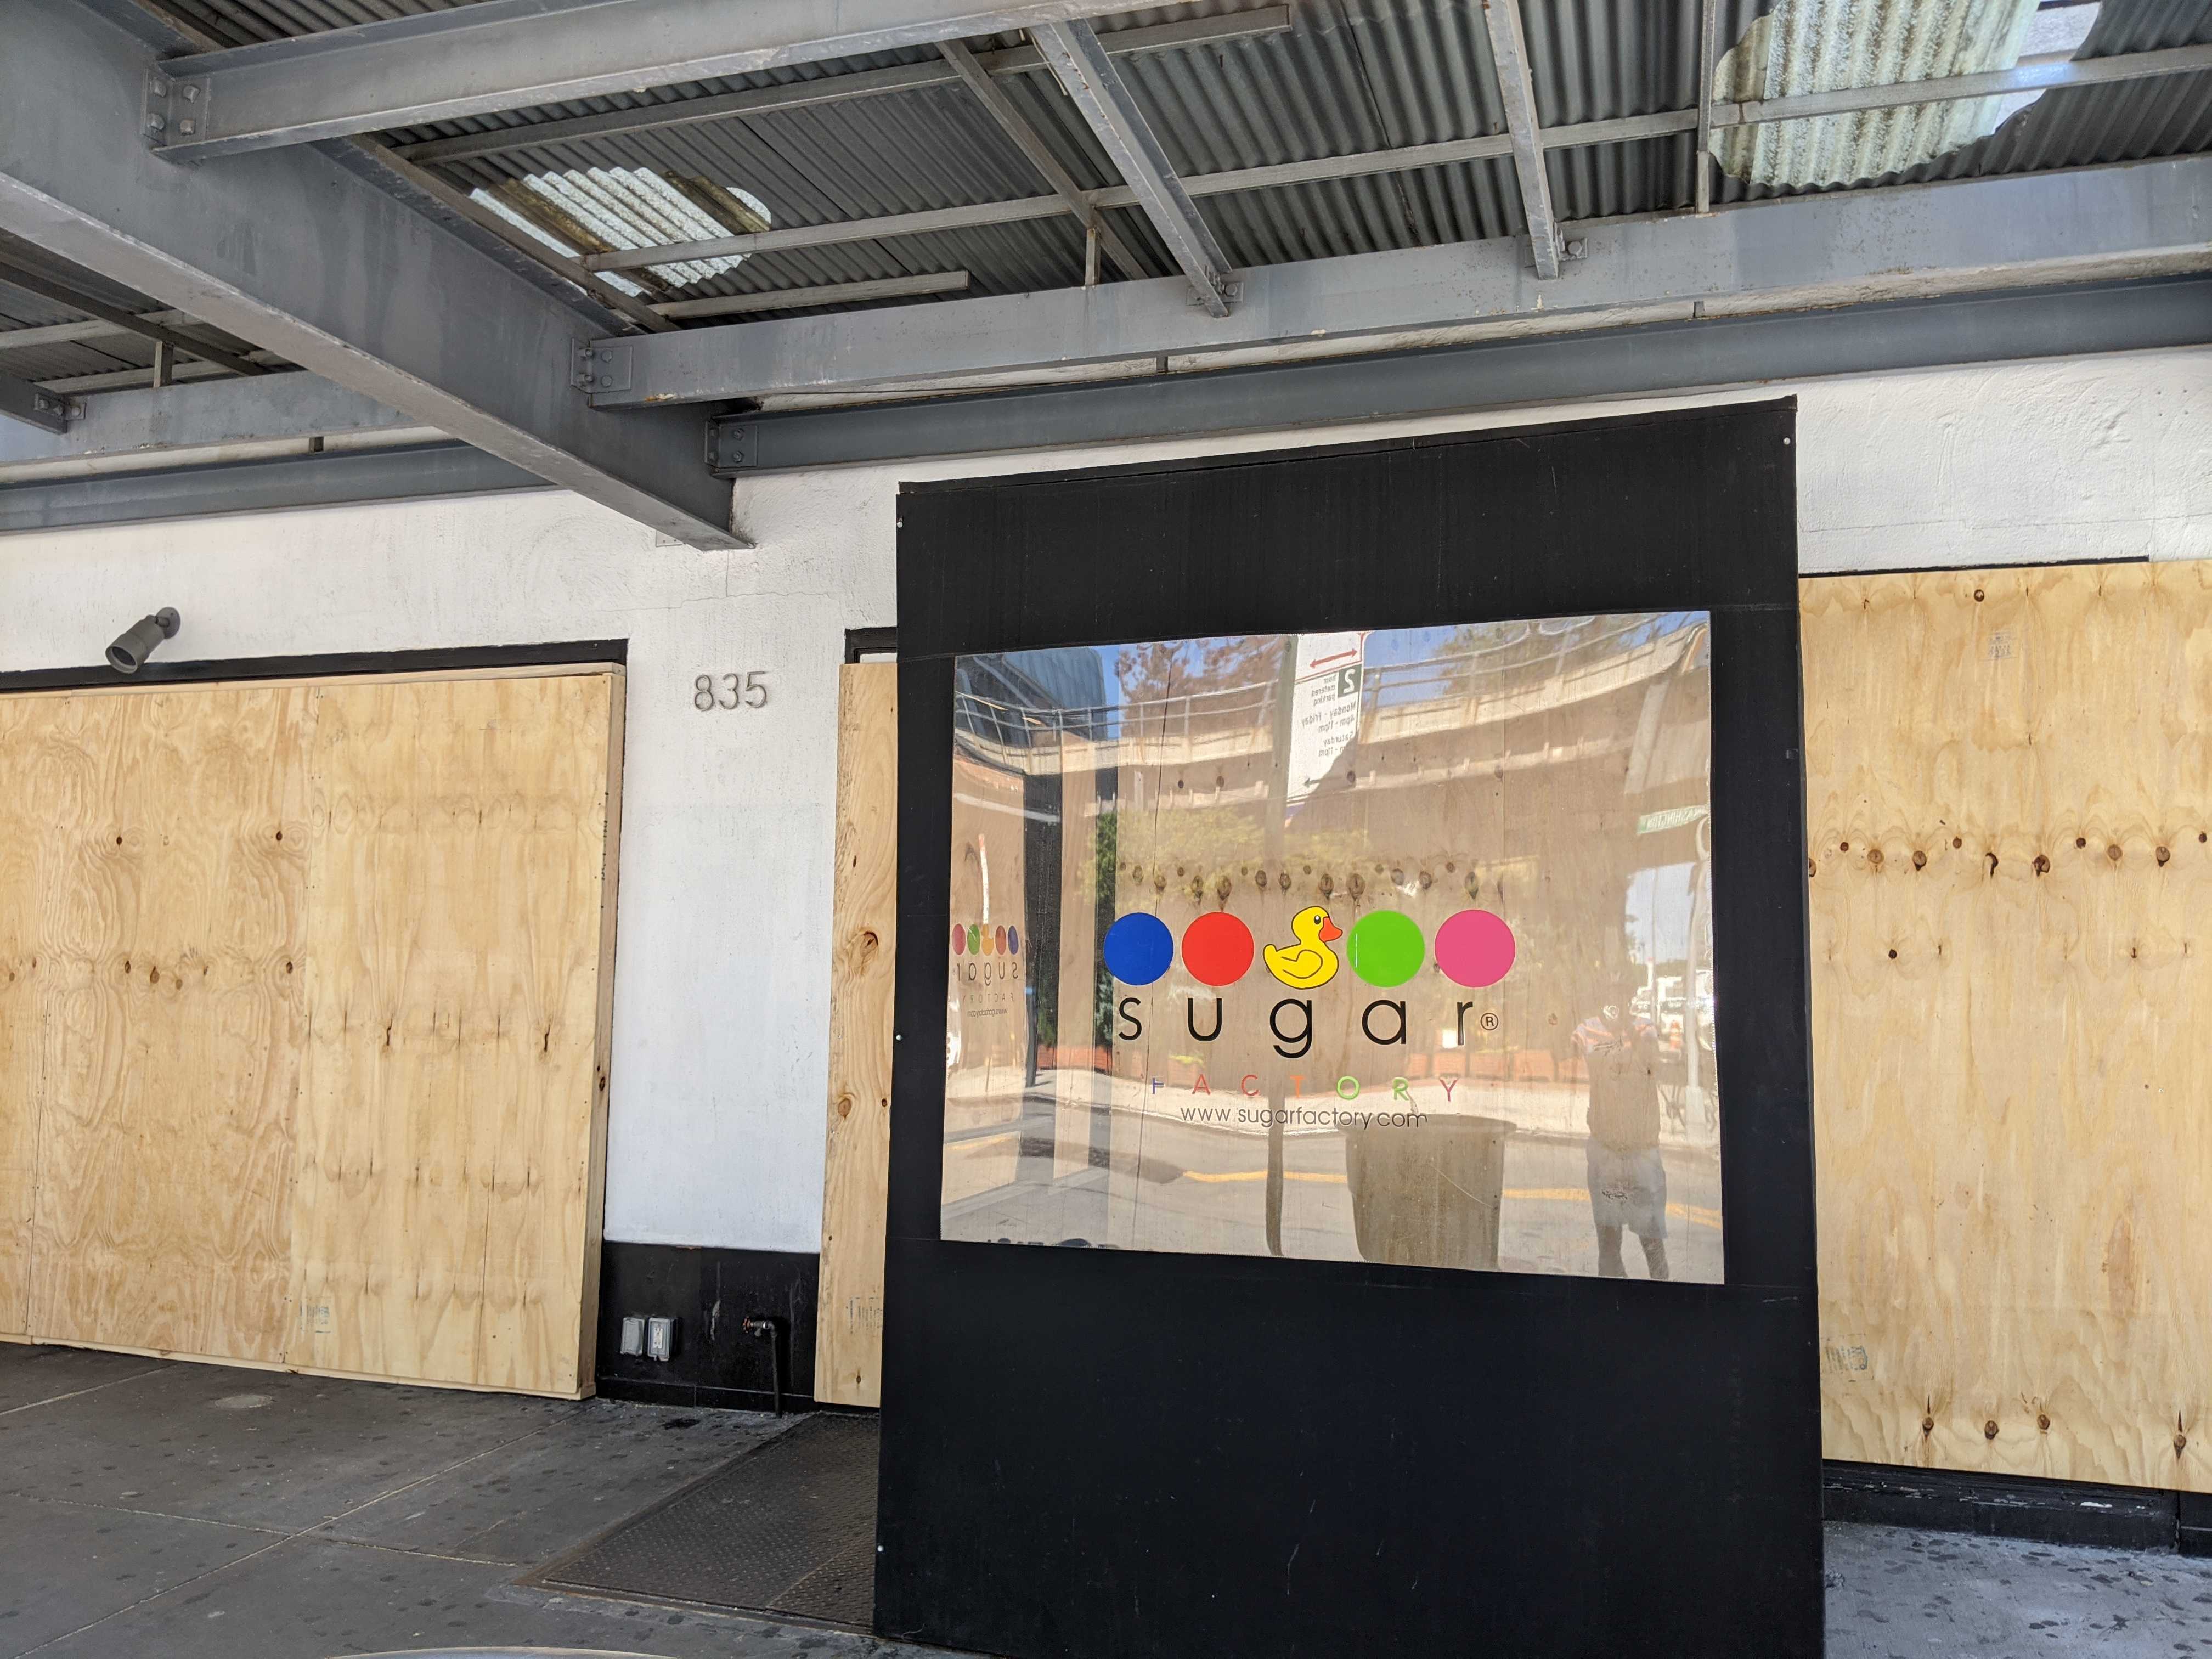 A storefront with wooden boards covering its windows. In front, a sign says “Sugar Factory” with a colorful logo